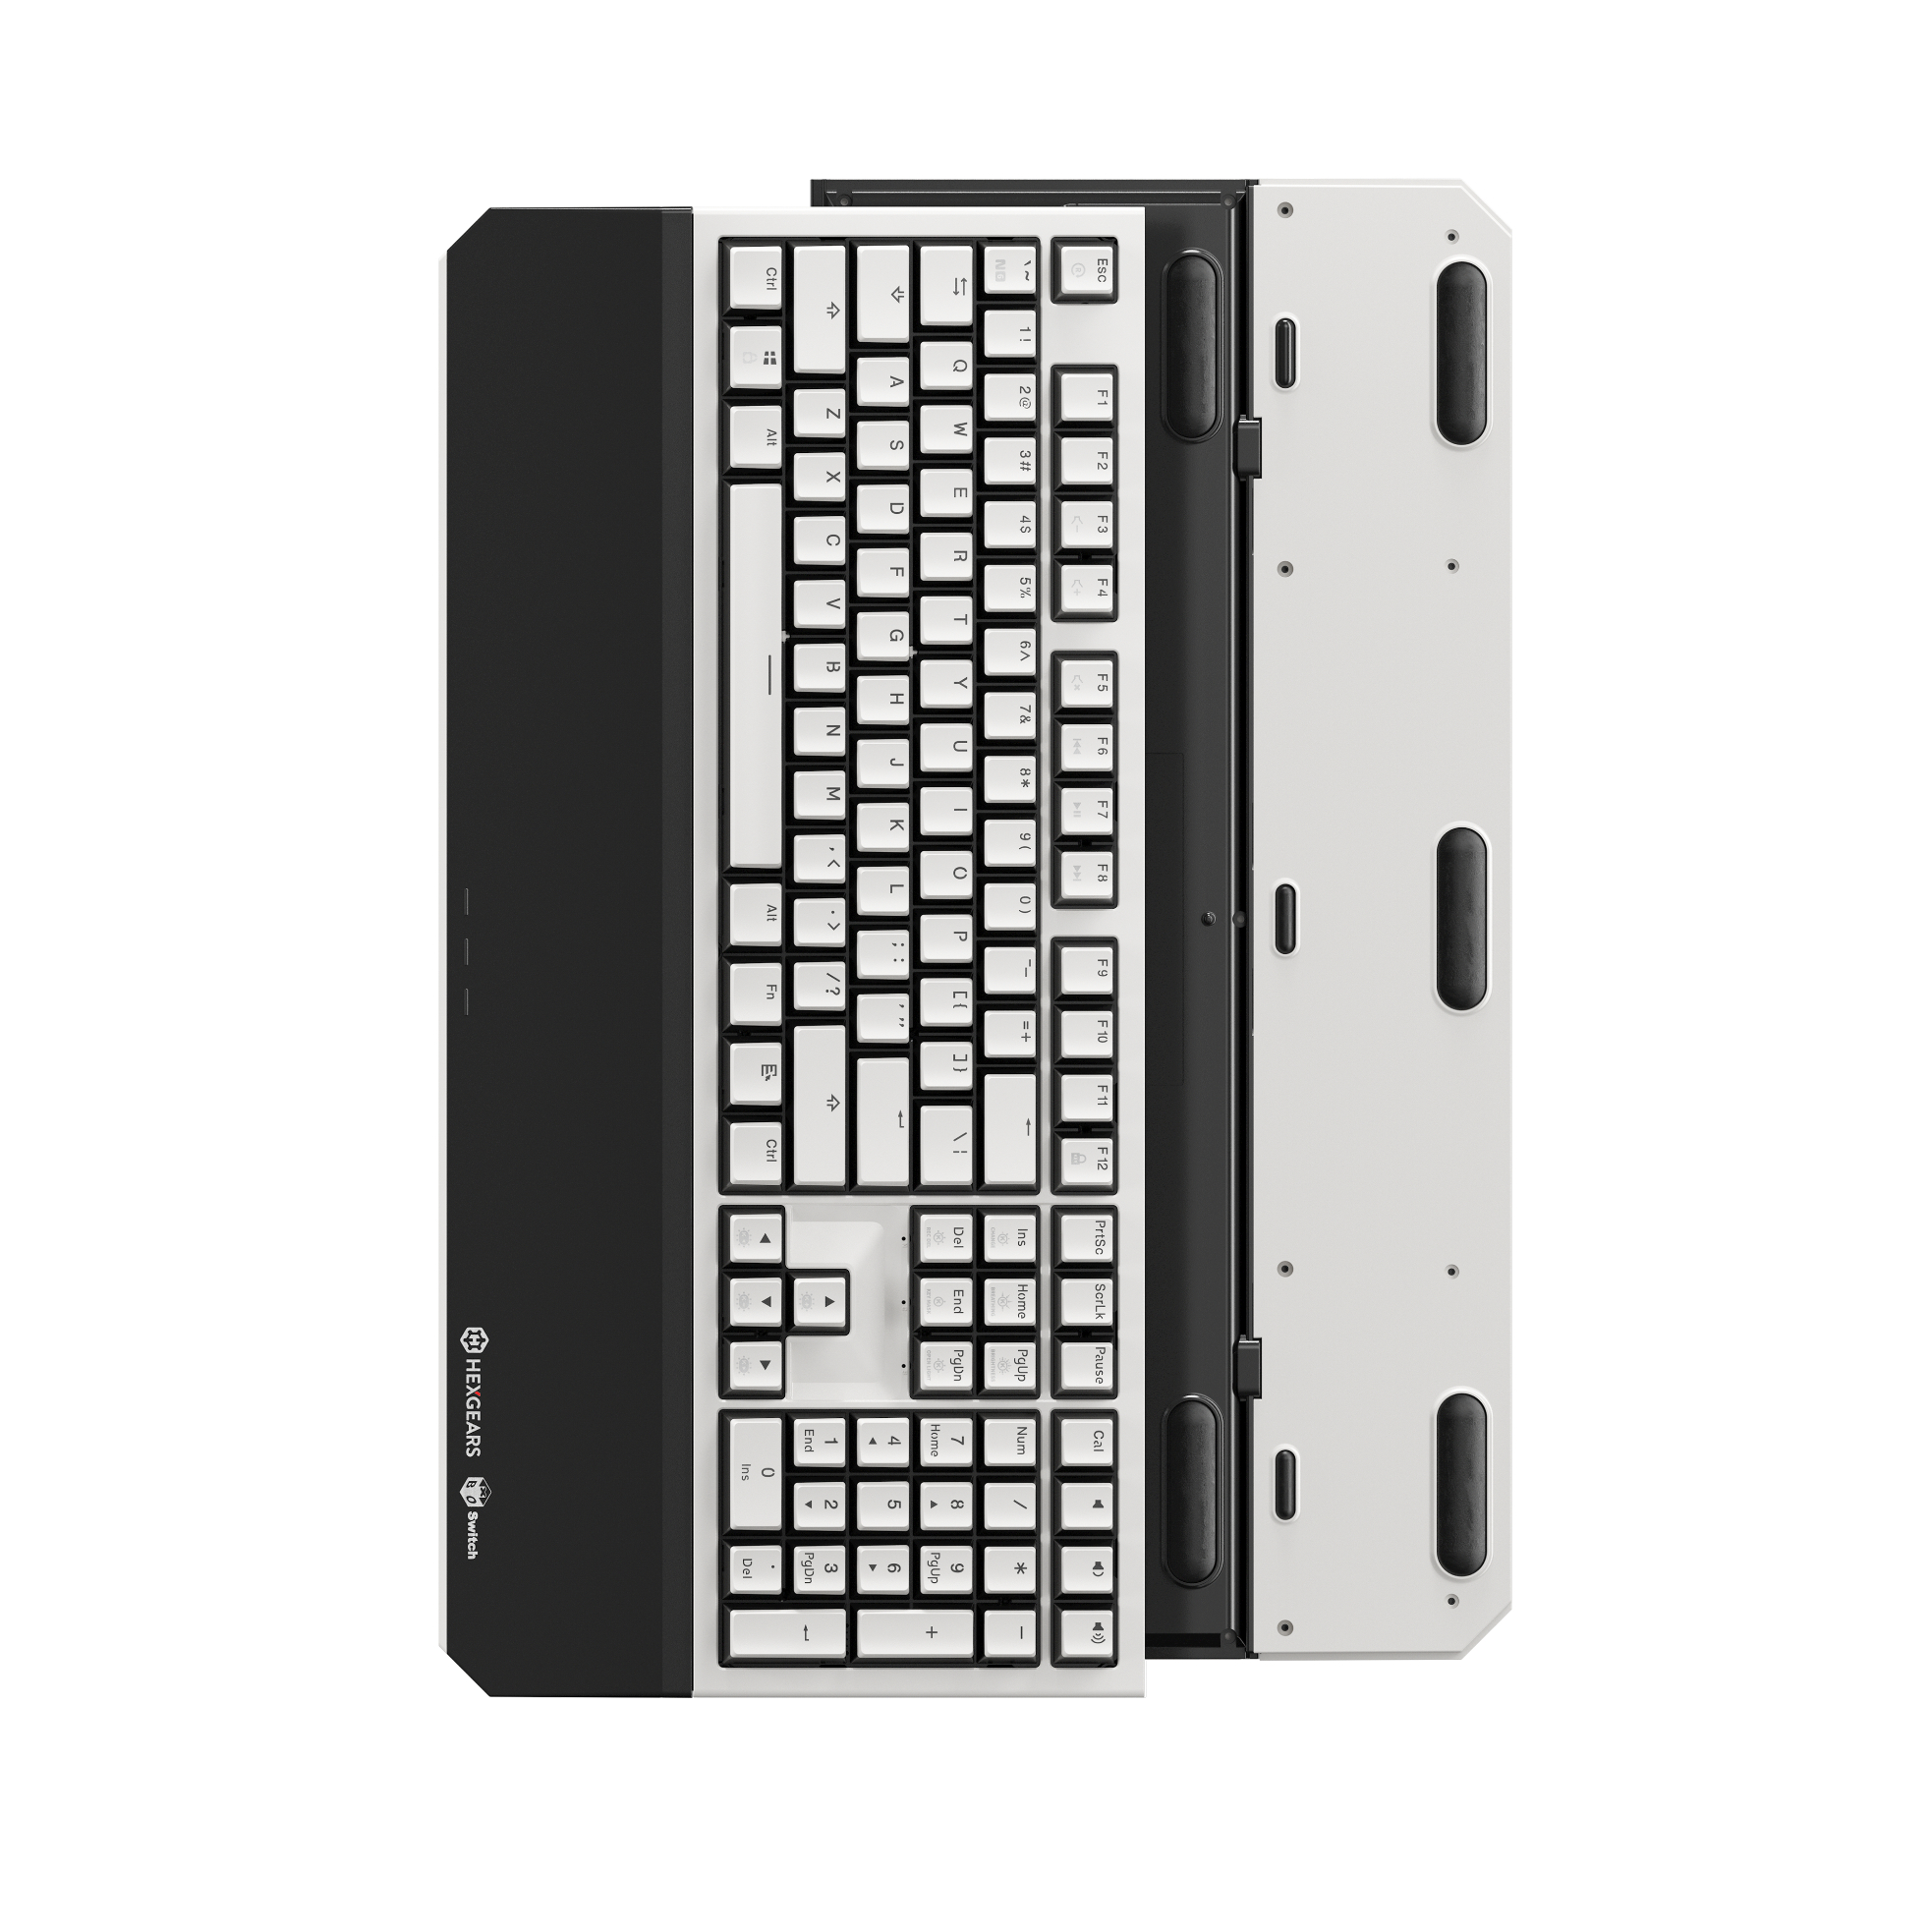 Hexgears G5 2.4G Wireless Mechanical Keyboard 104 Key，Wireless and Type-C Wired Connection, 100% Full-Size, Blue LED Backlit, Windows and Mac OS Comp